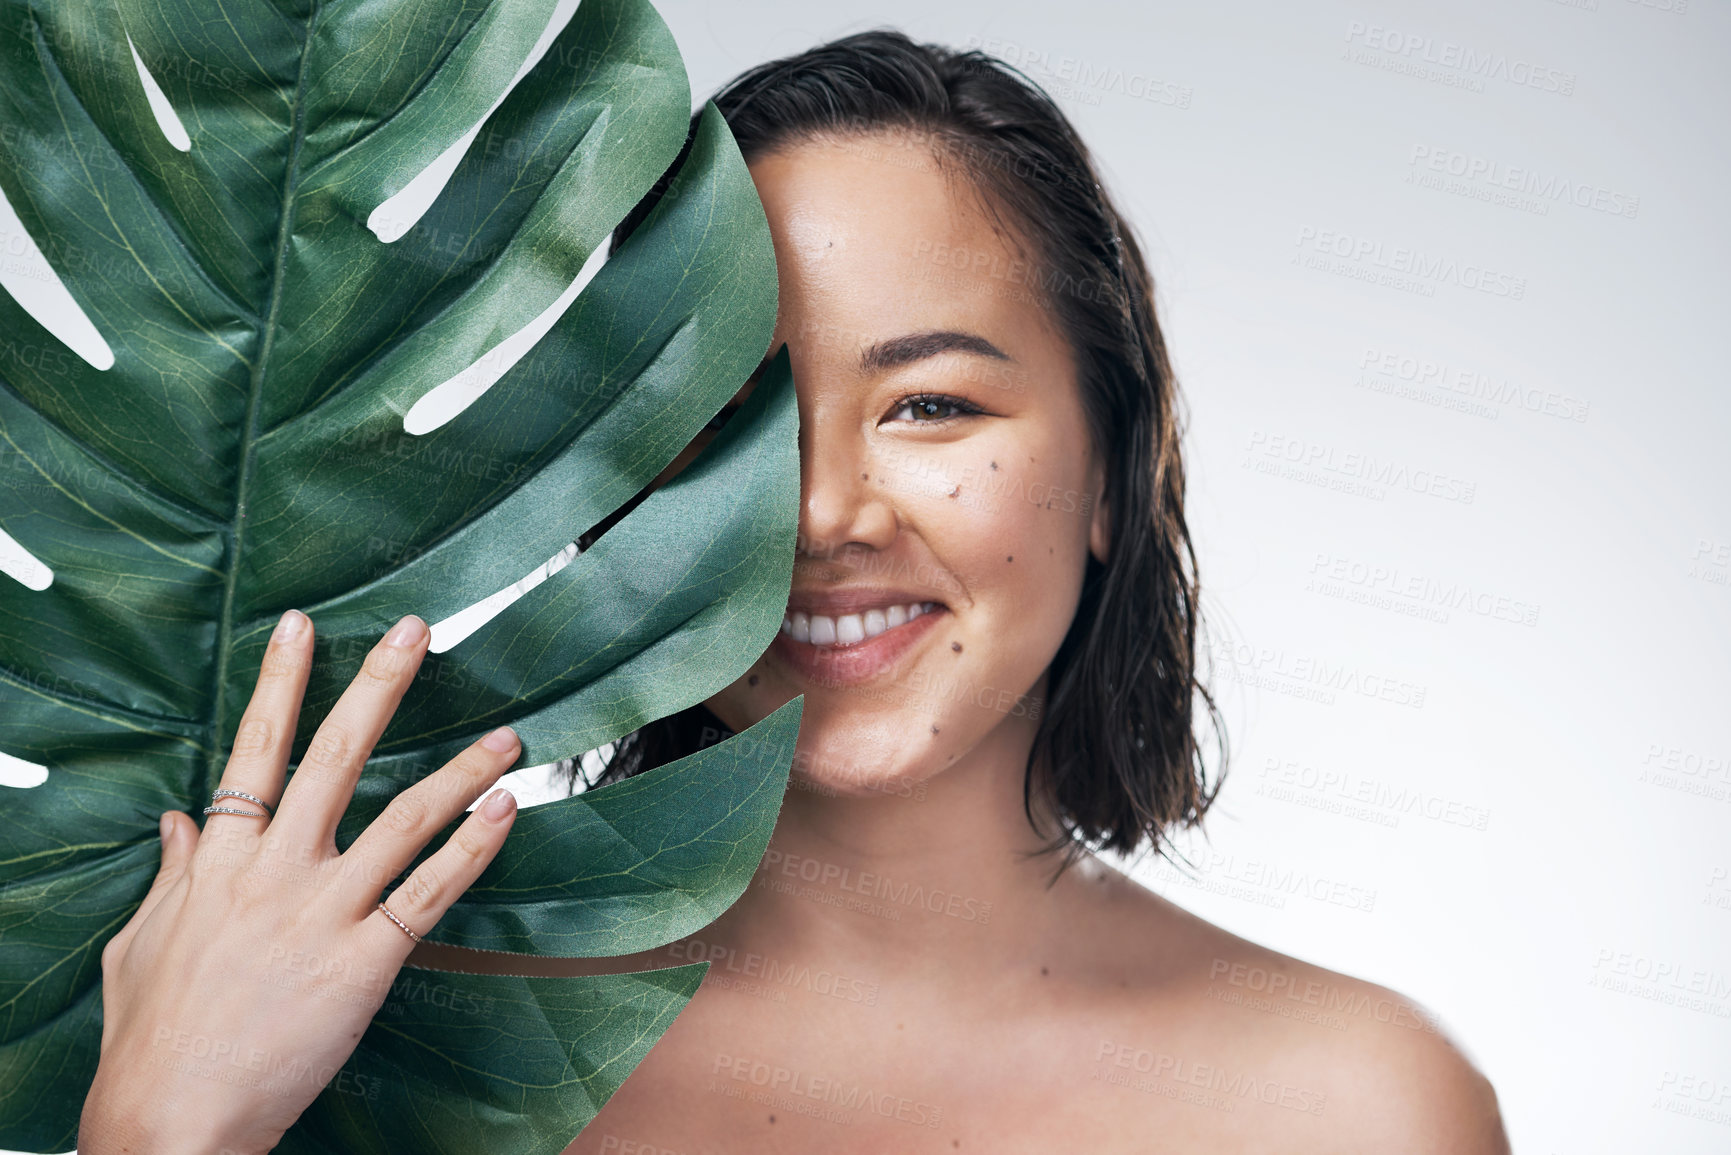 Buy stock photo Studio shot of a beautiful young woman holding a monstera leaf against her face